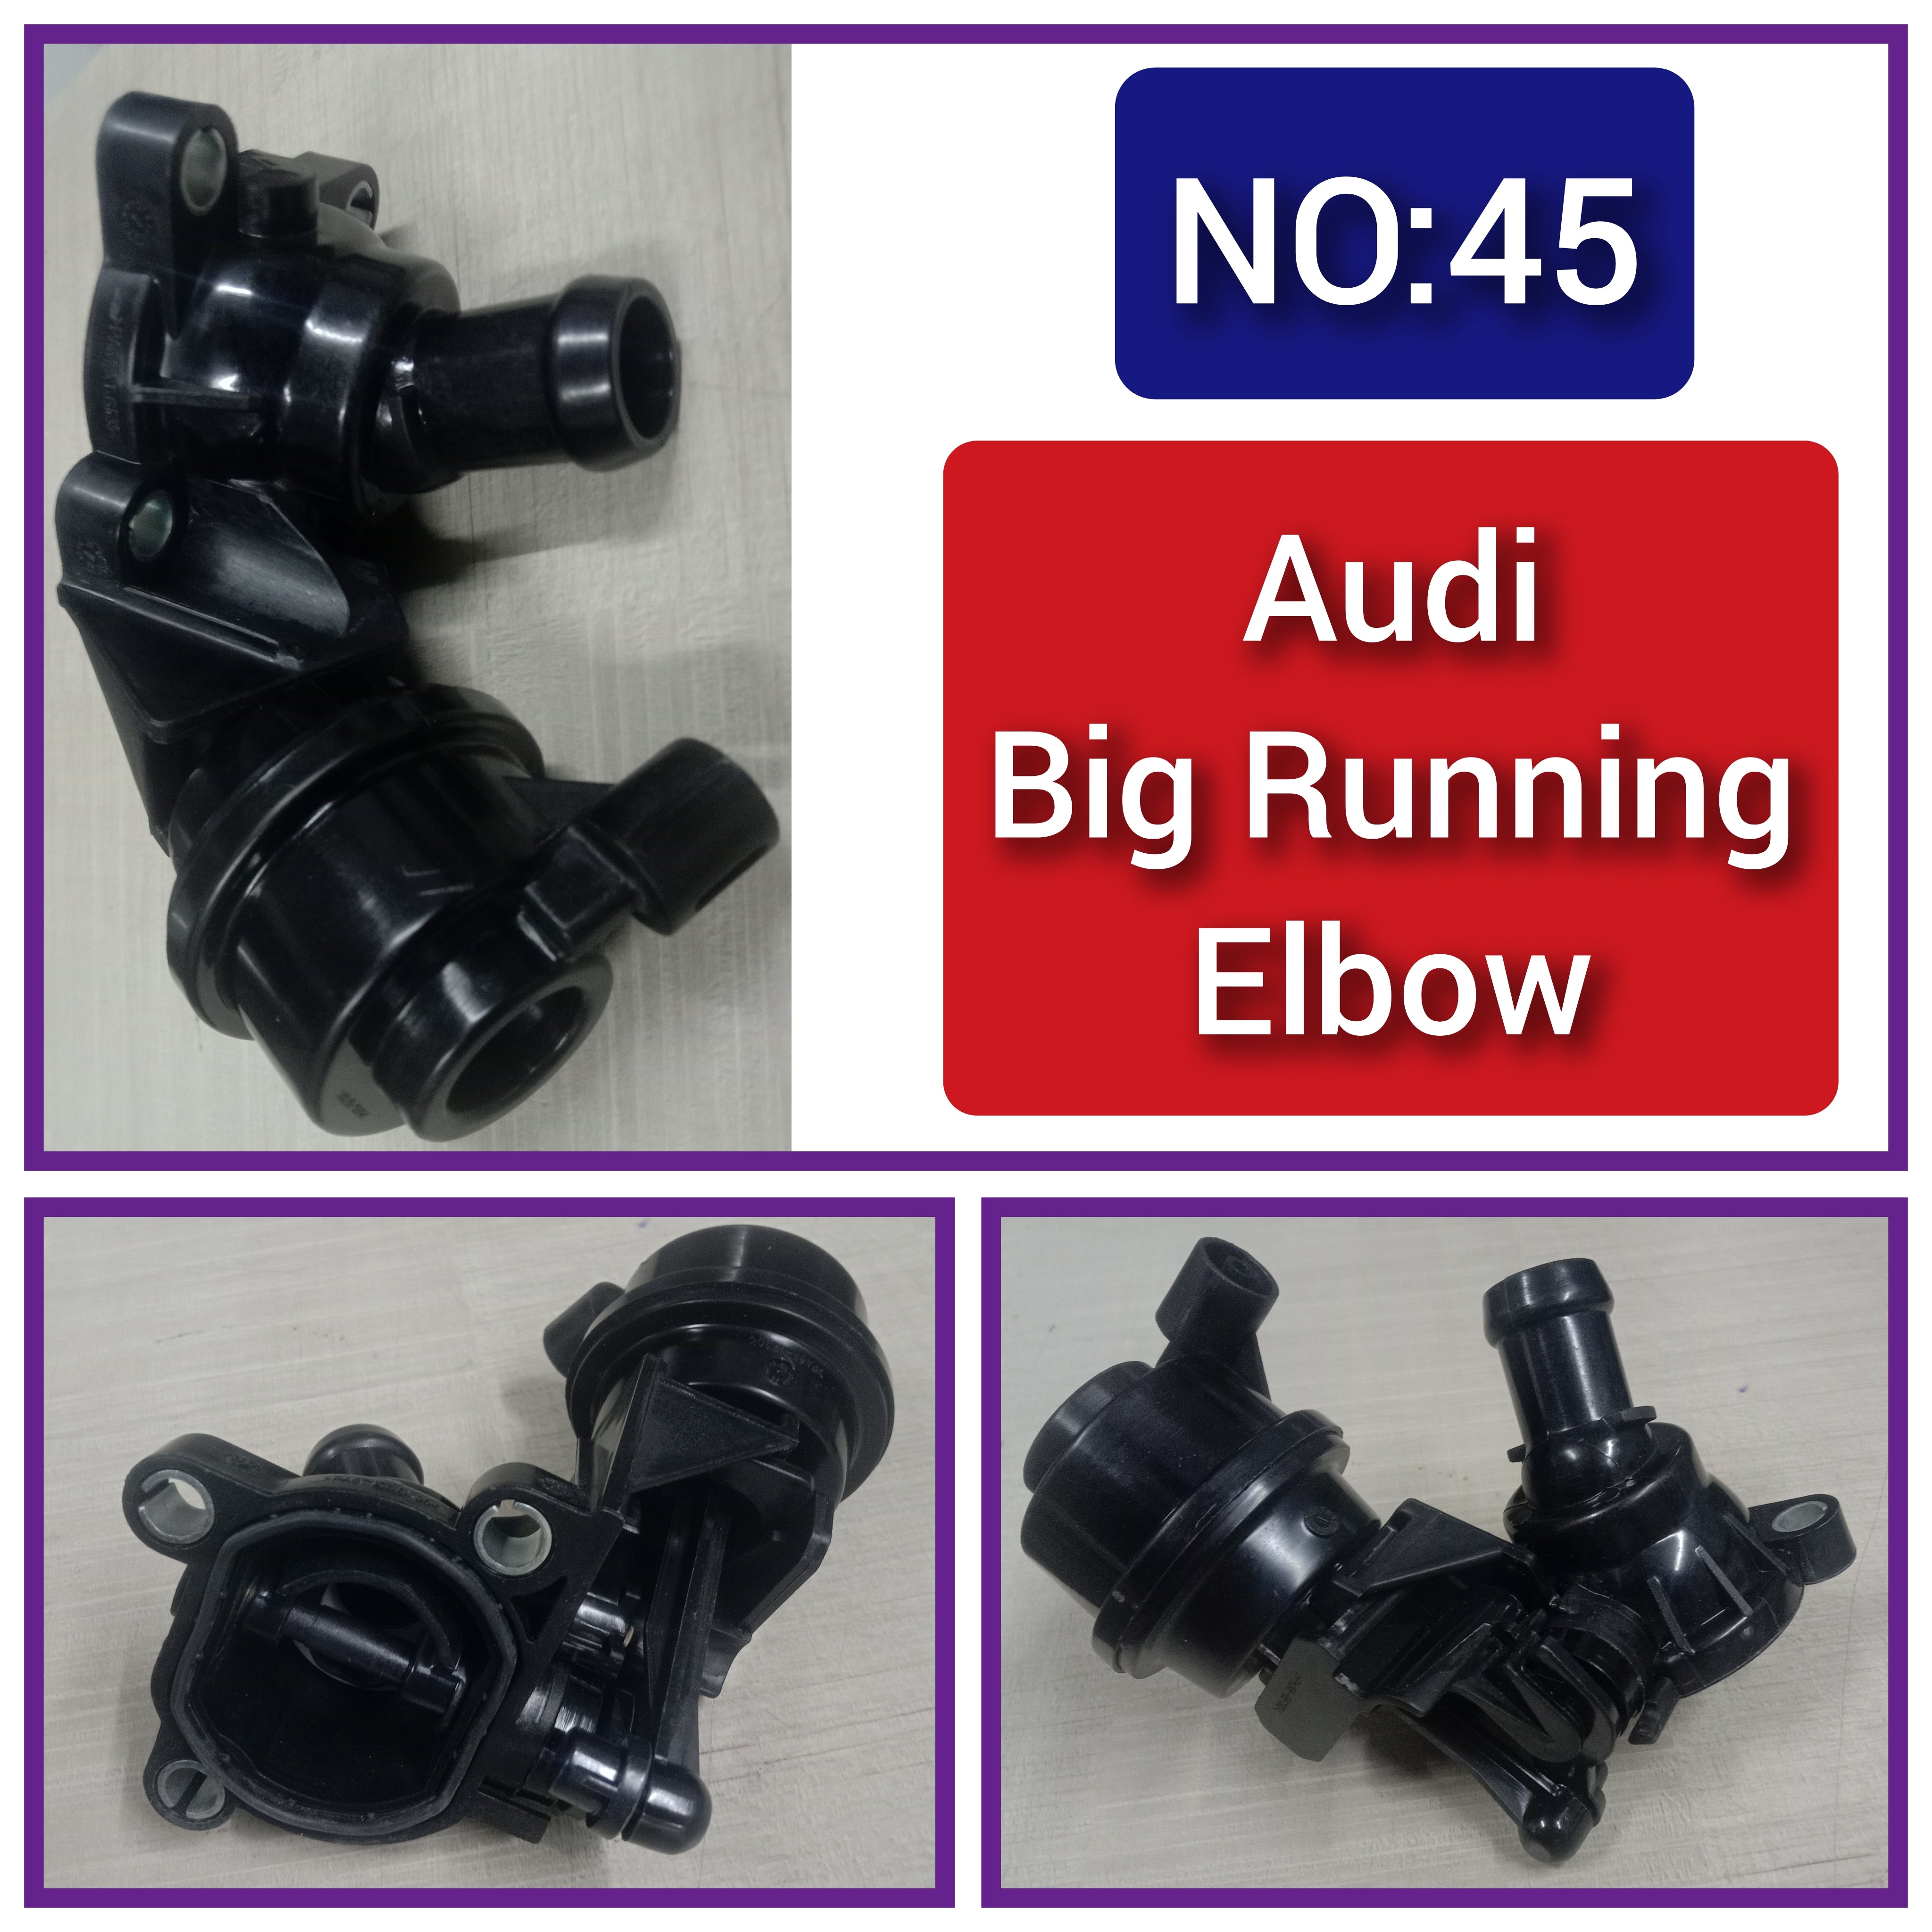 Elbow (Thermostat) 059121737R  For AUDI  A4 A6 A8 Q5 Q7  Tag-E-45/49